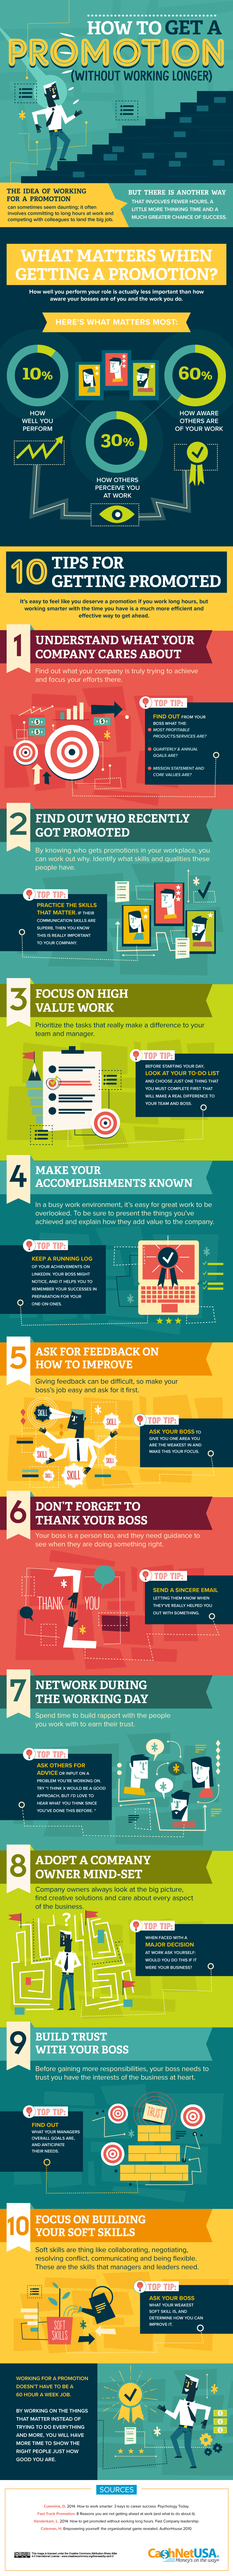 How to Get a Promotion Without Working Longer Infographic